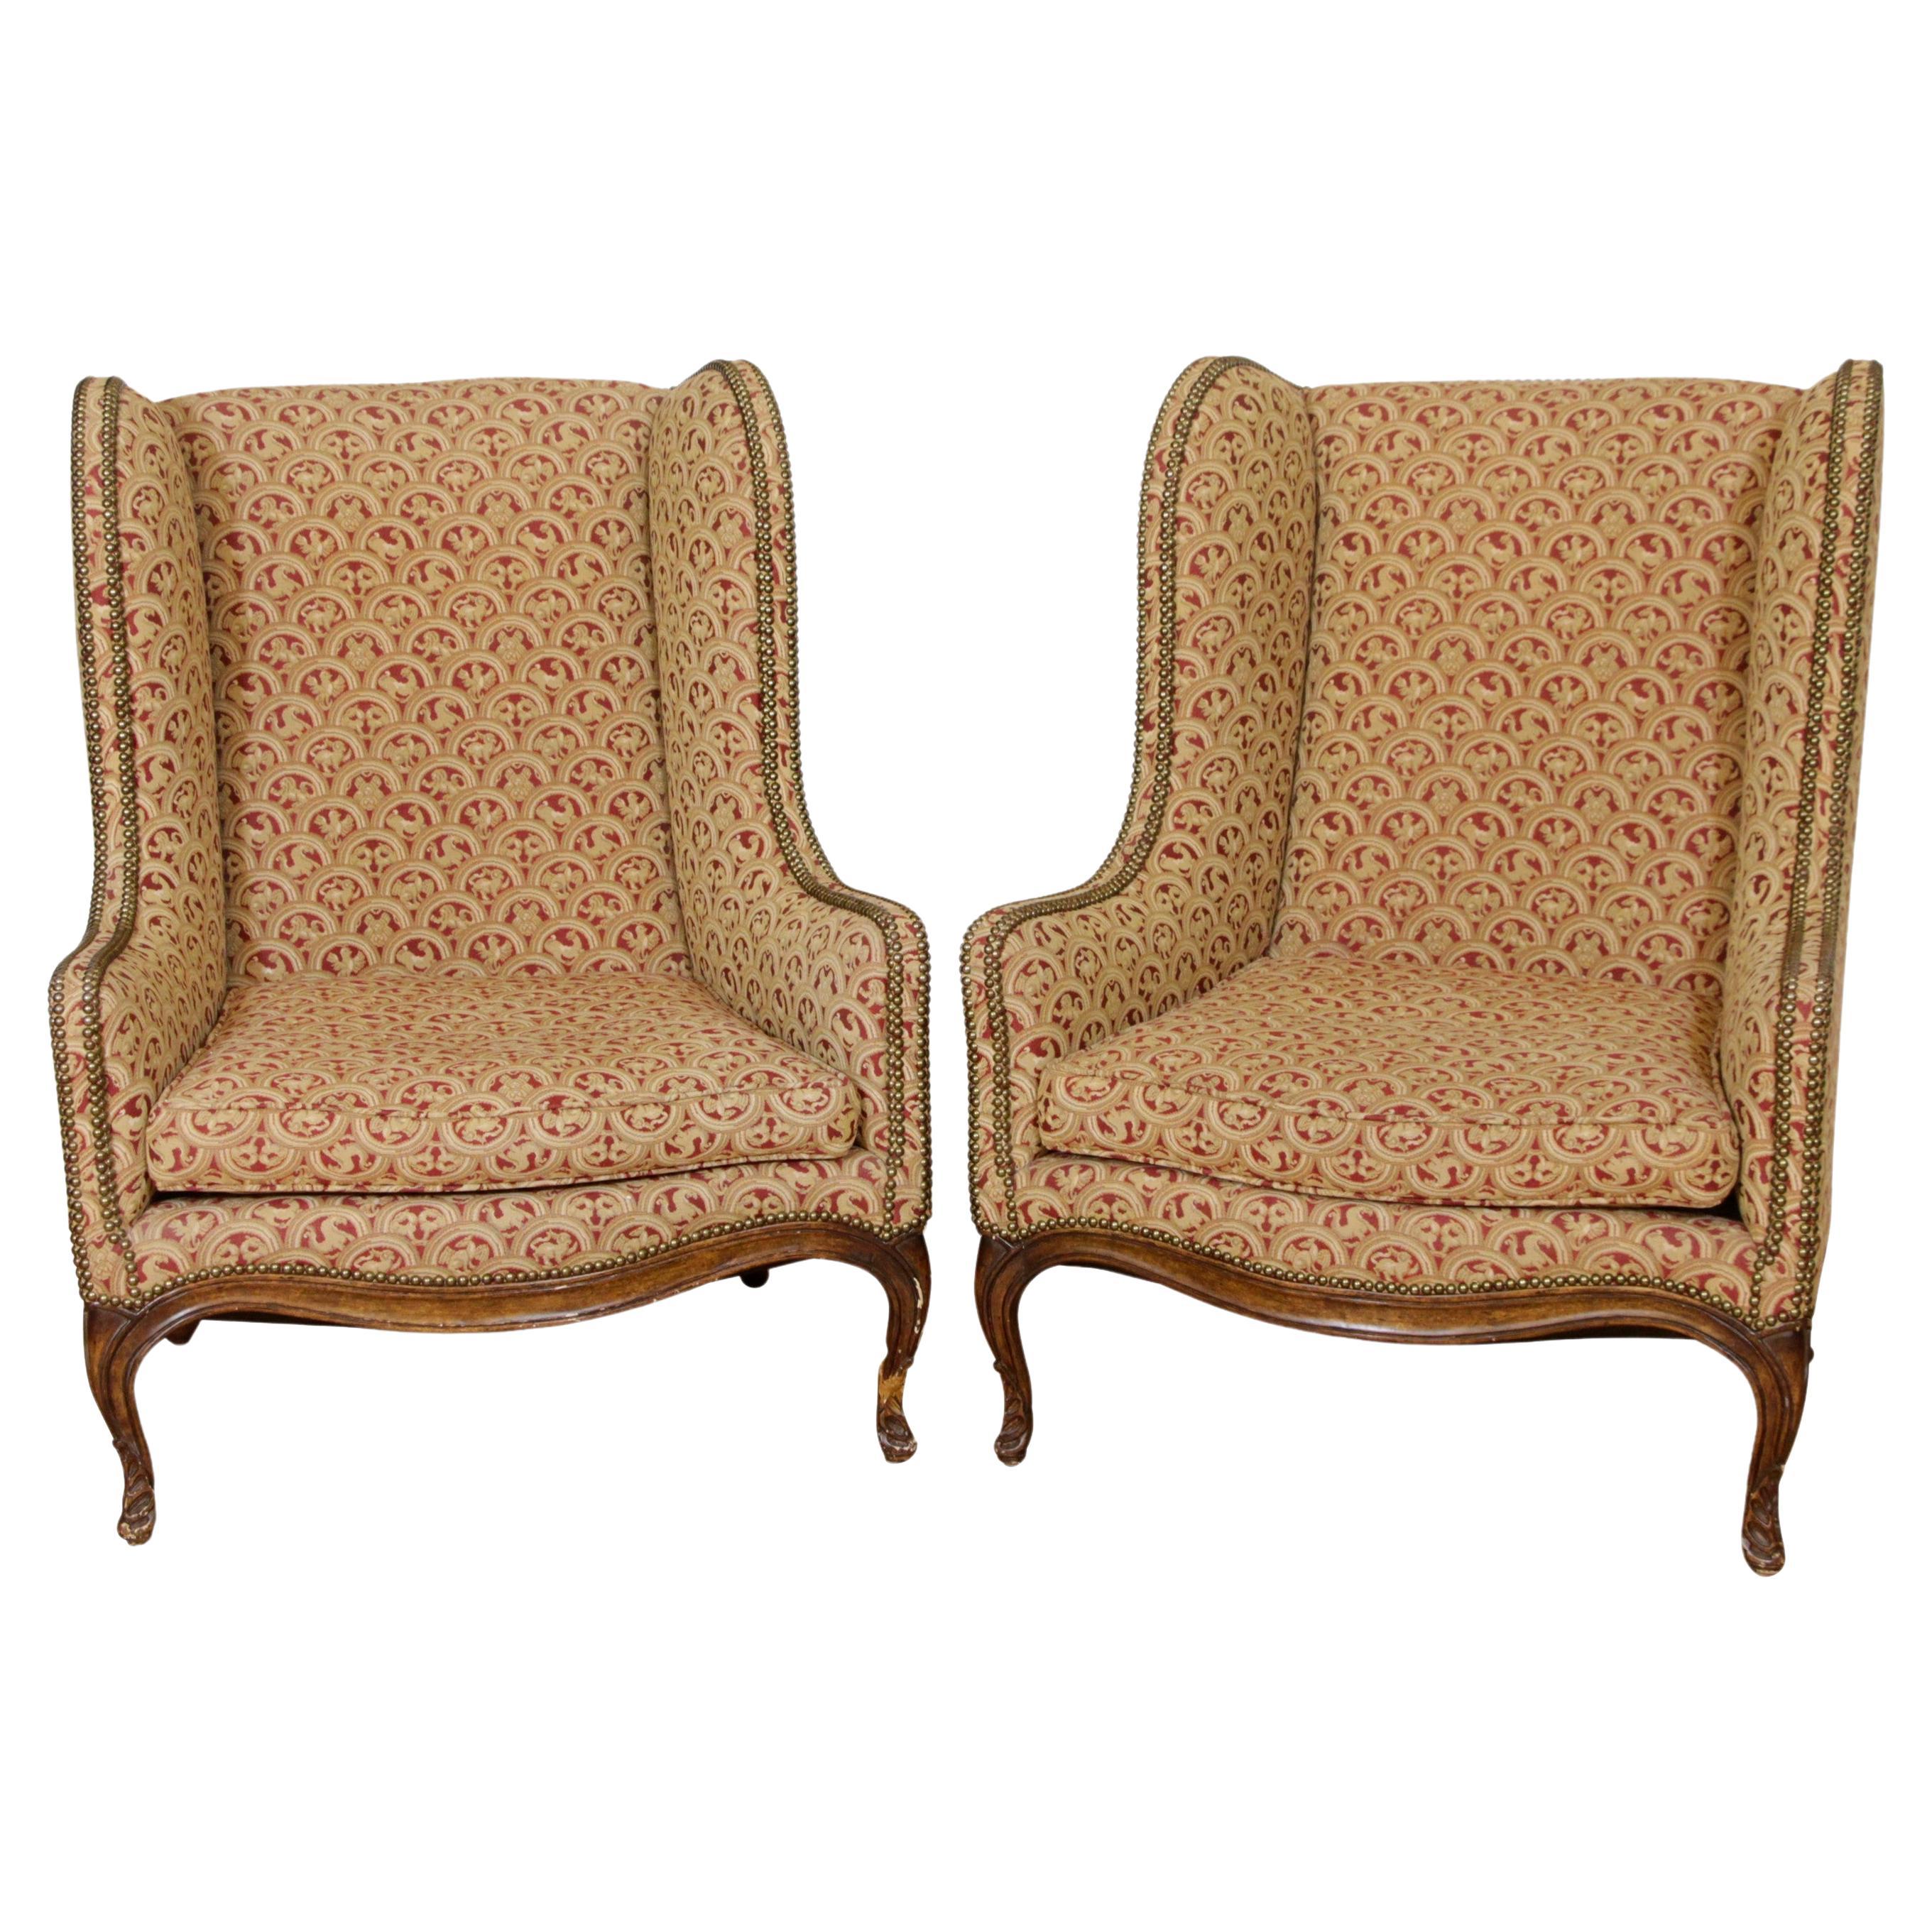 Pair of Upholstered Tan Wing Back Chairs w/ Ornate Figural Details